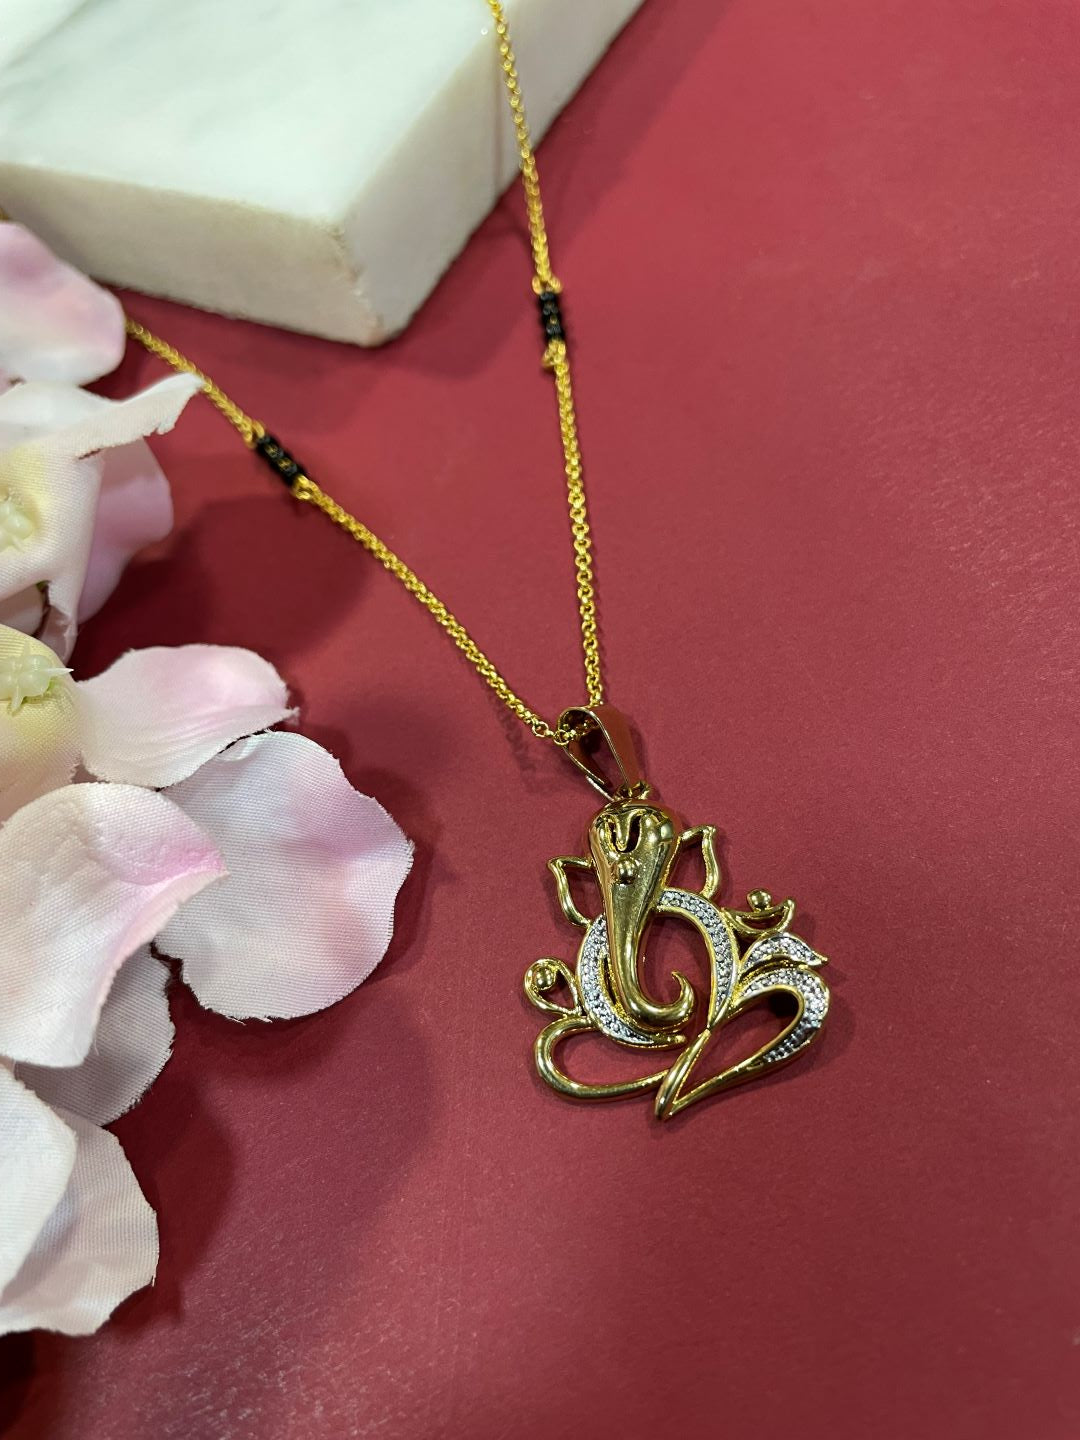 image for Short Mangalsutra/Necklace With a Ganesha Pendant